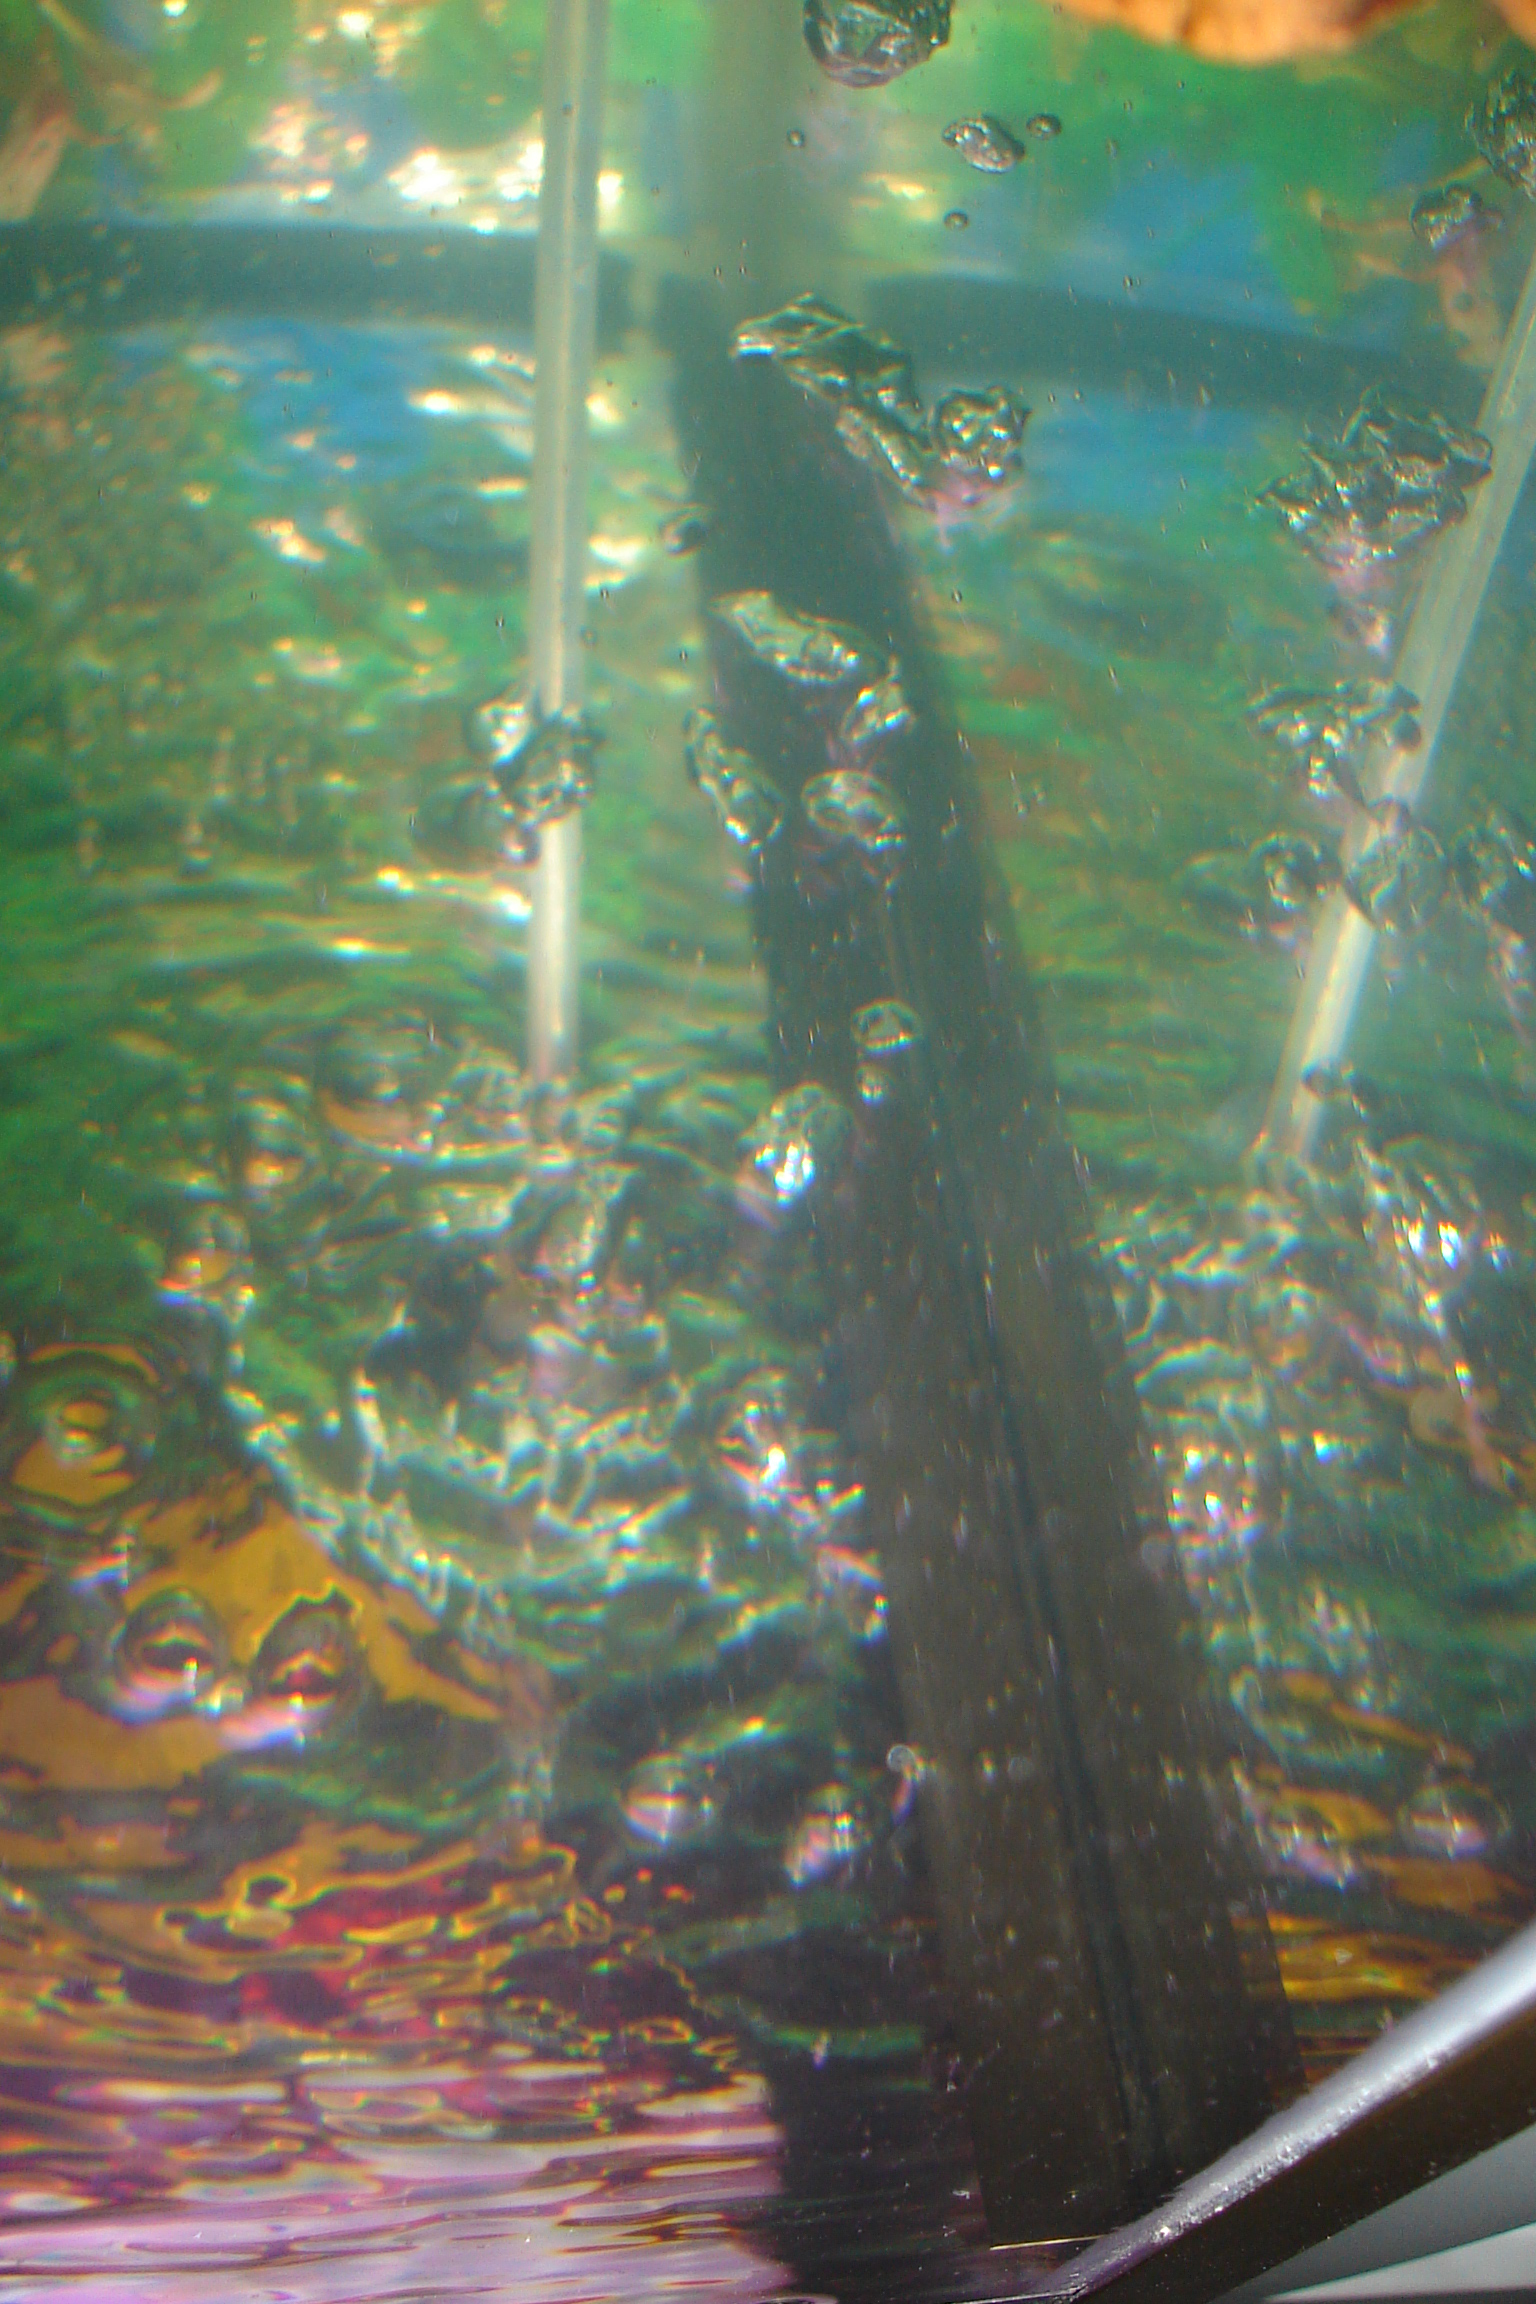 air bubbles in a fishtank tank fish under water poows